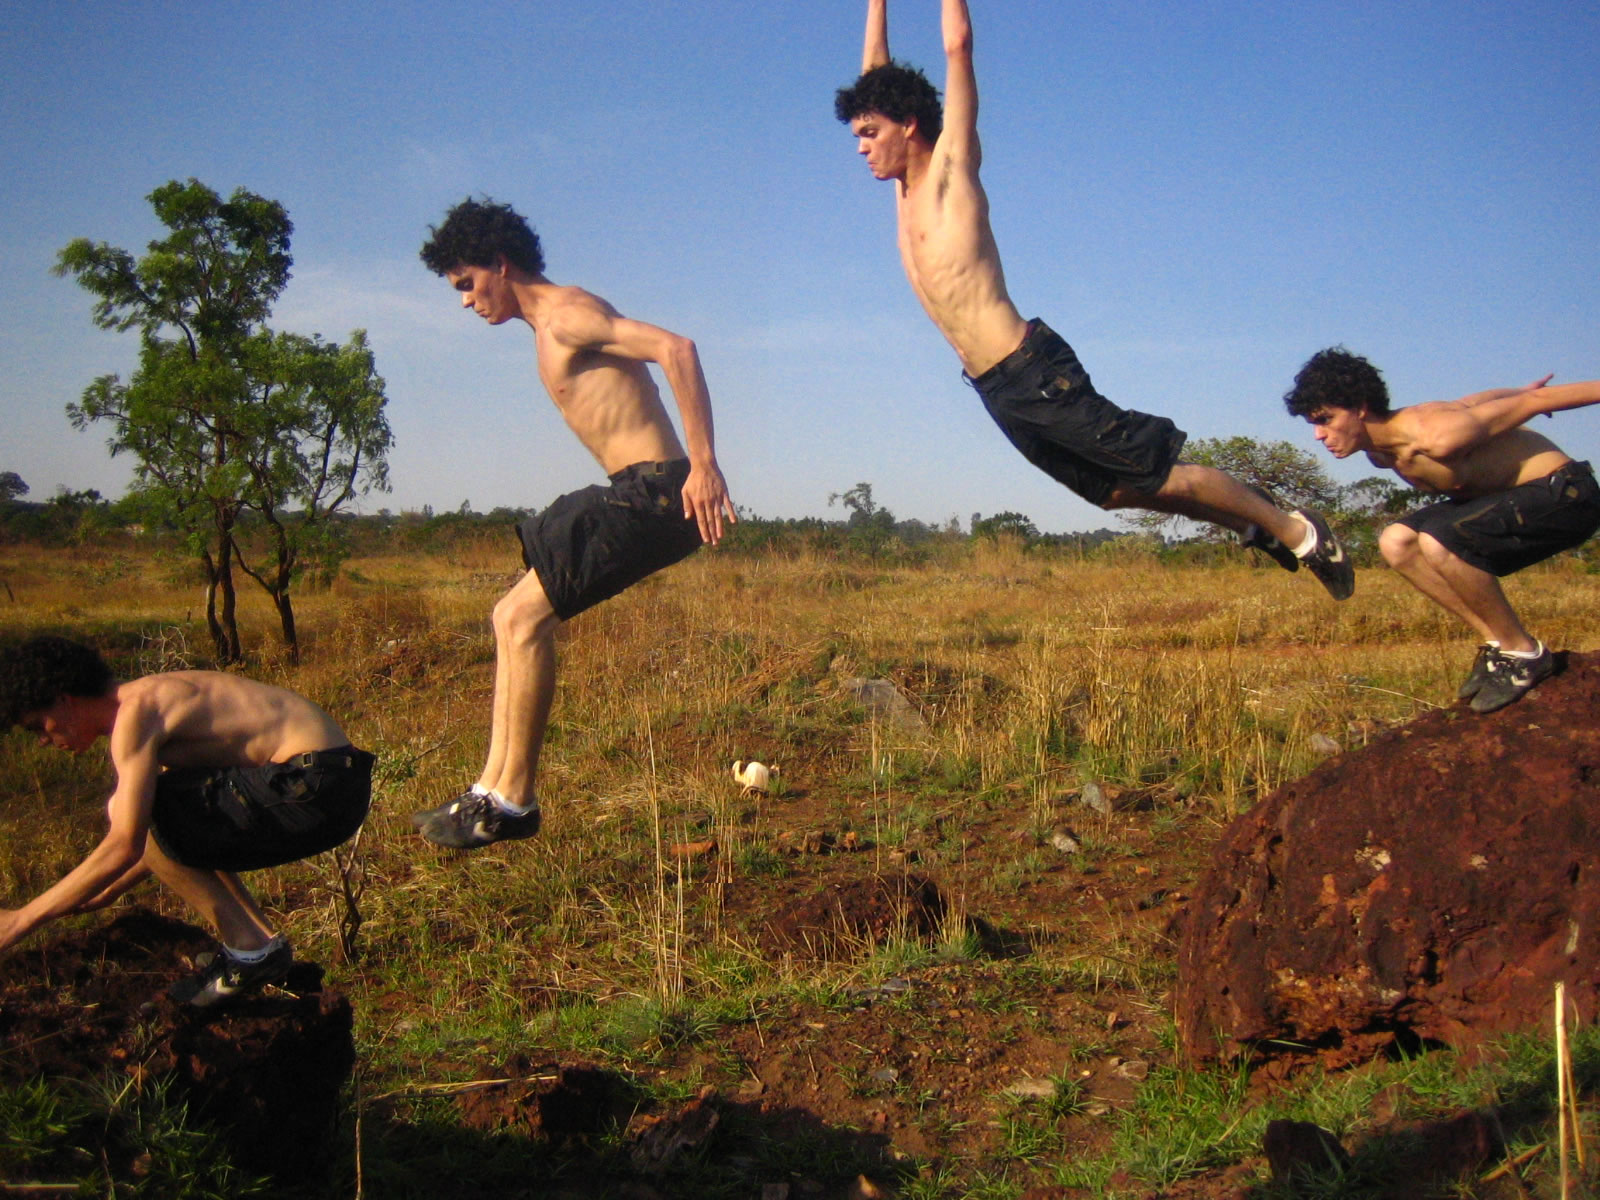 A deputy submits a request for recognition of a sport known as “Parkour”.